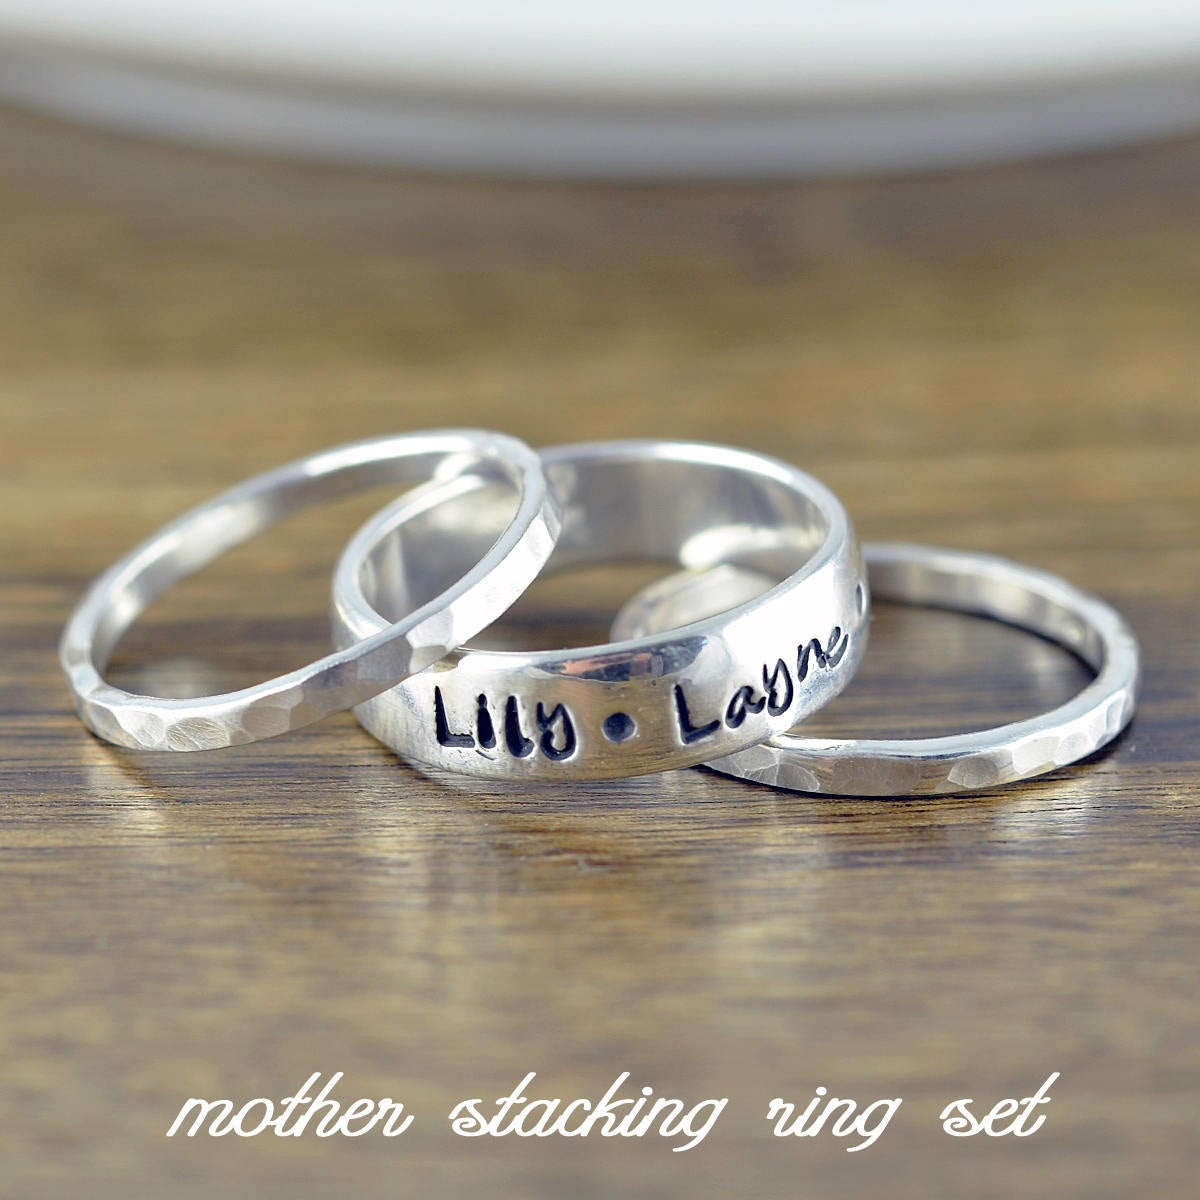 Mothers Stackable Rings - Personalized Stacking Ring - Gift for Mom - Name Rings - Mothers Jewelry - Mothers Ring - Mom Ring